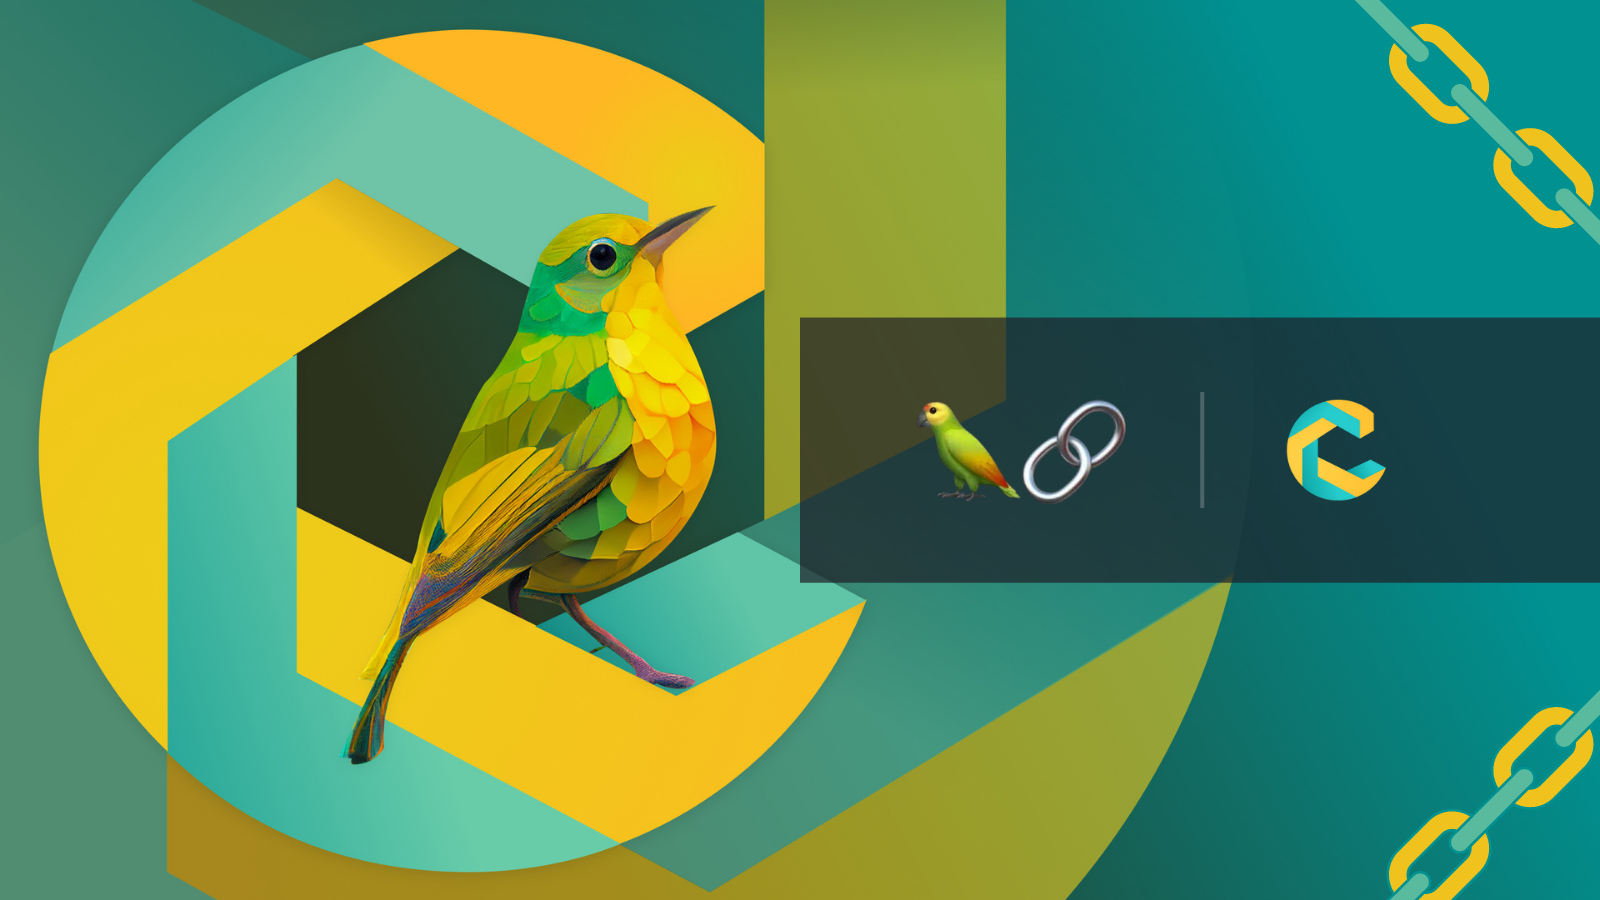 Abstract artwork of two stylized green and yellow birds against a geometric backdrop with a prominent letter 'C'